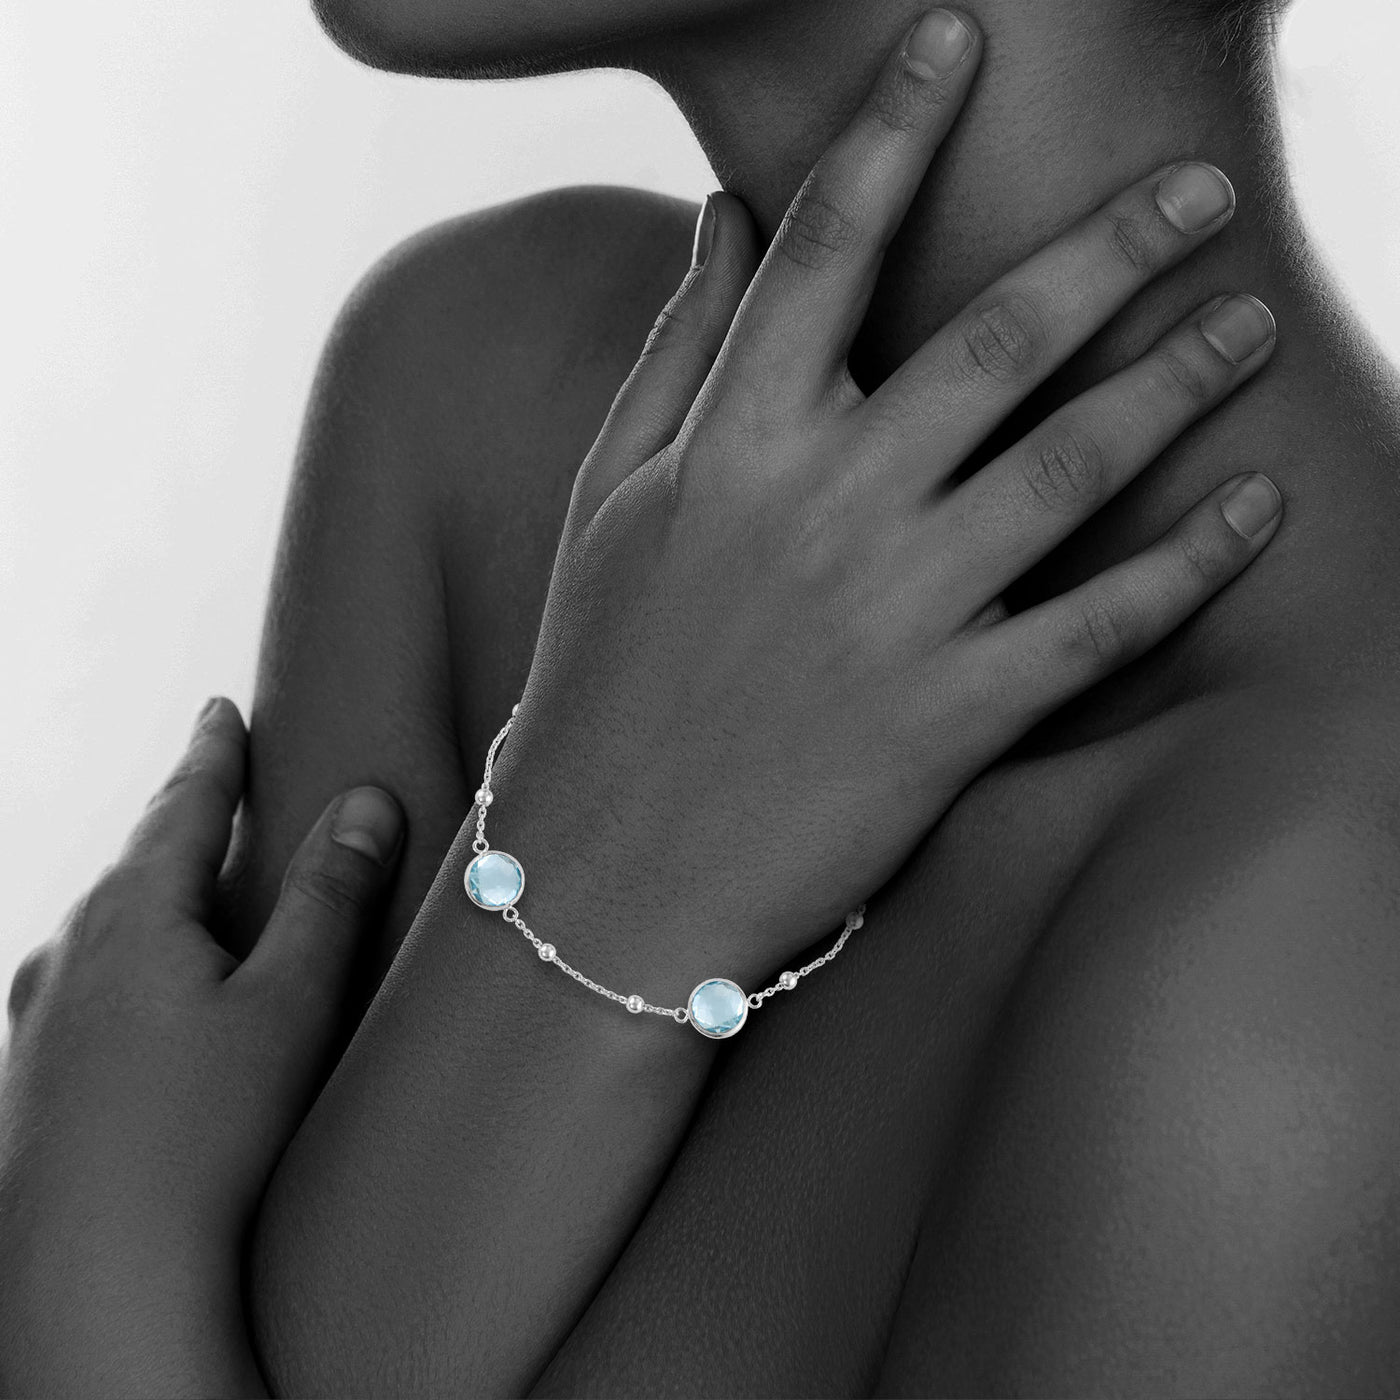 Sterling Silver Bezel Bracelet With Small Silver Stations And Blue Topaz Round Gemstones